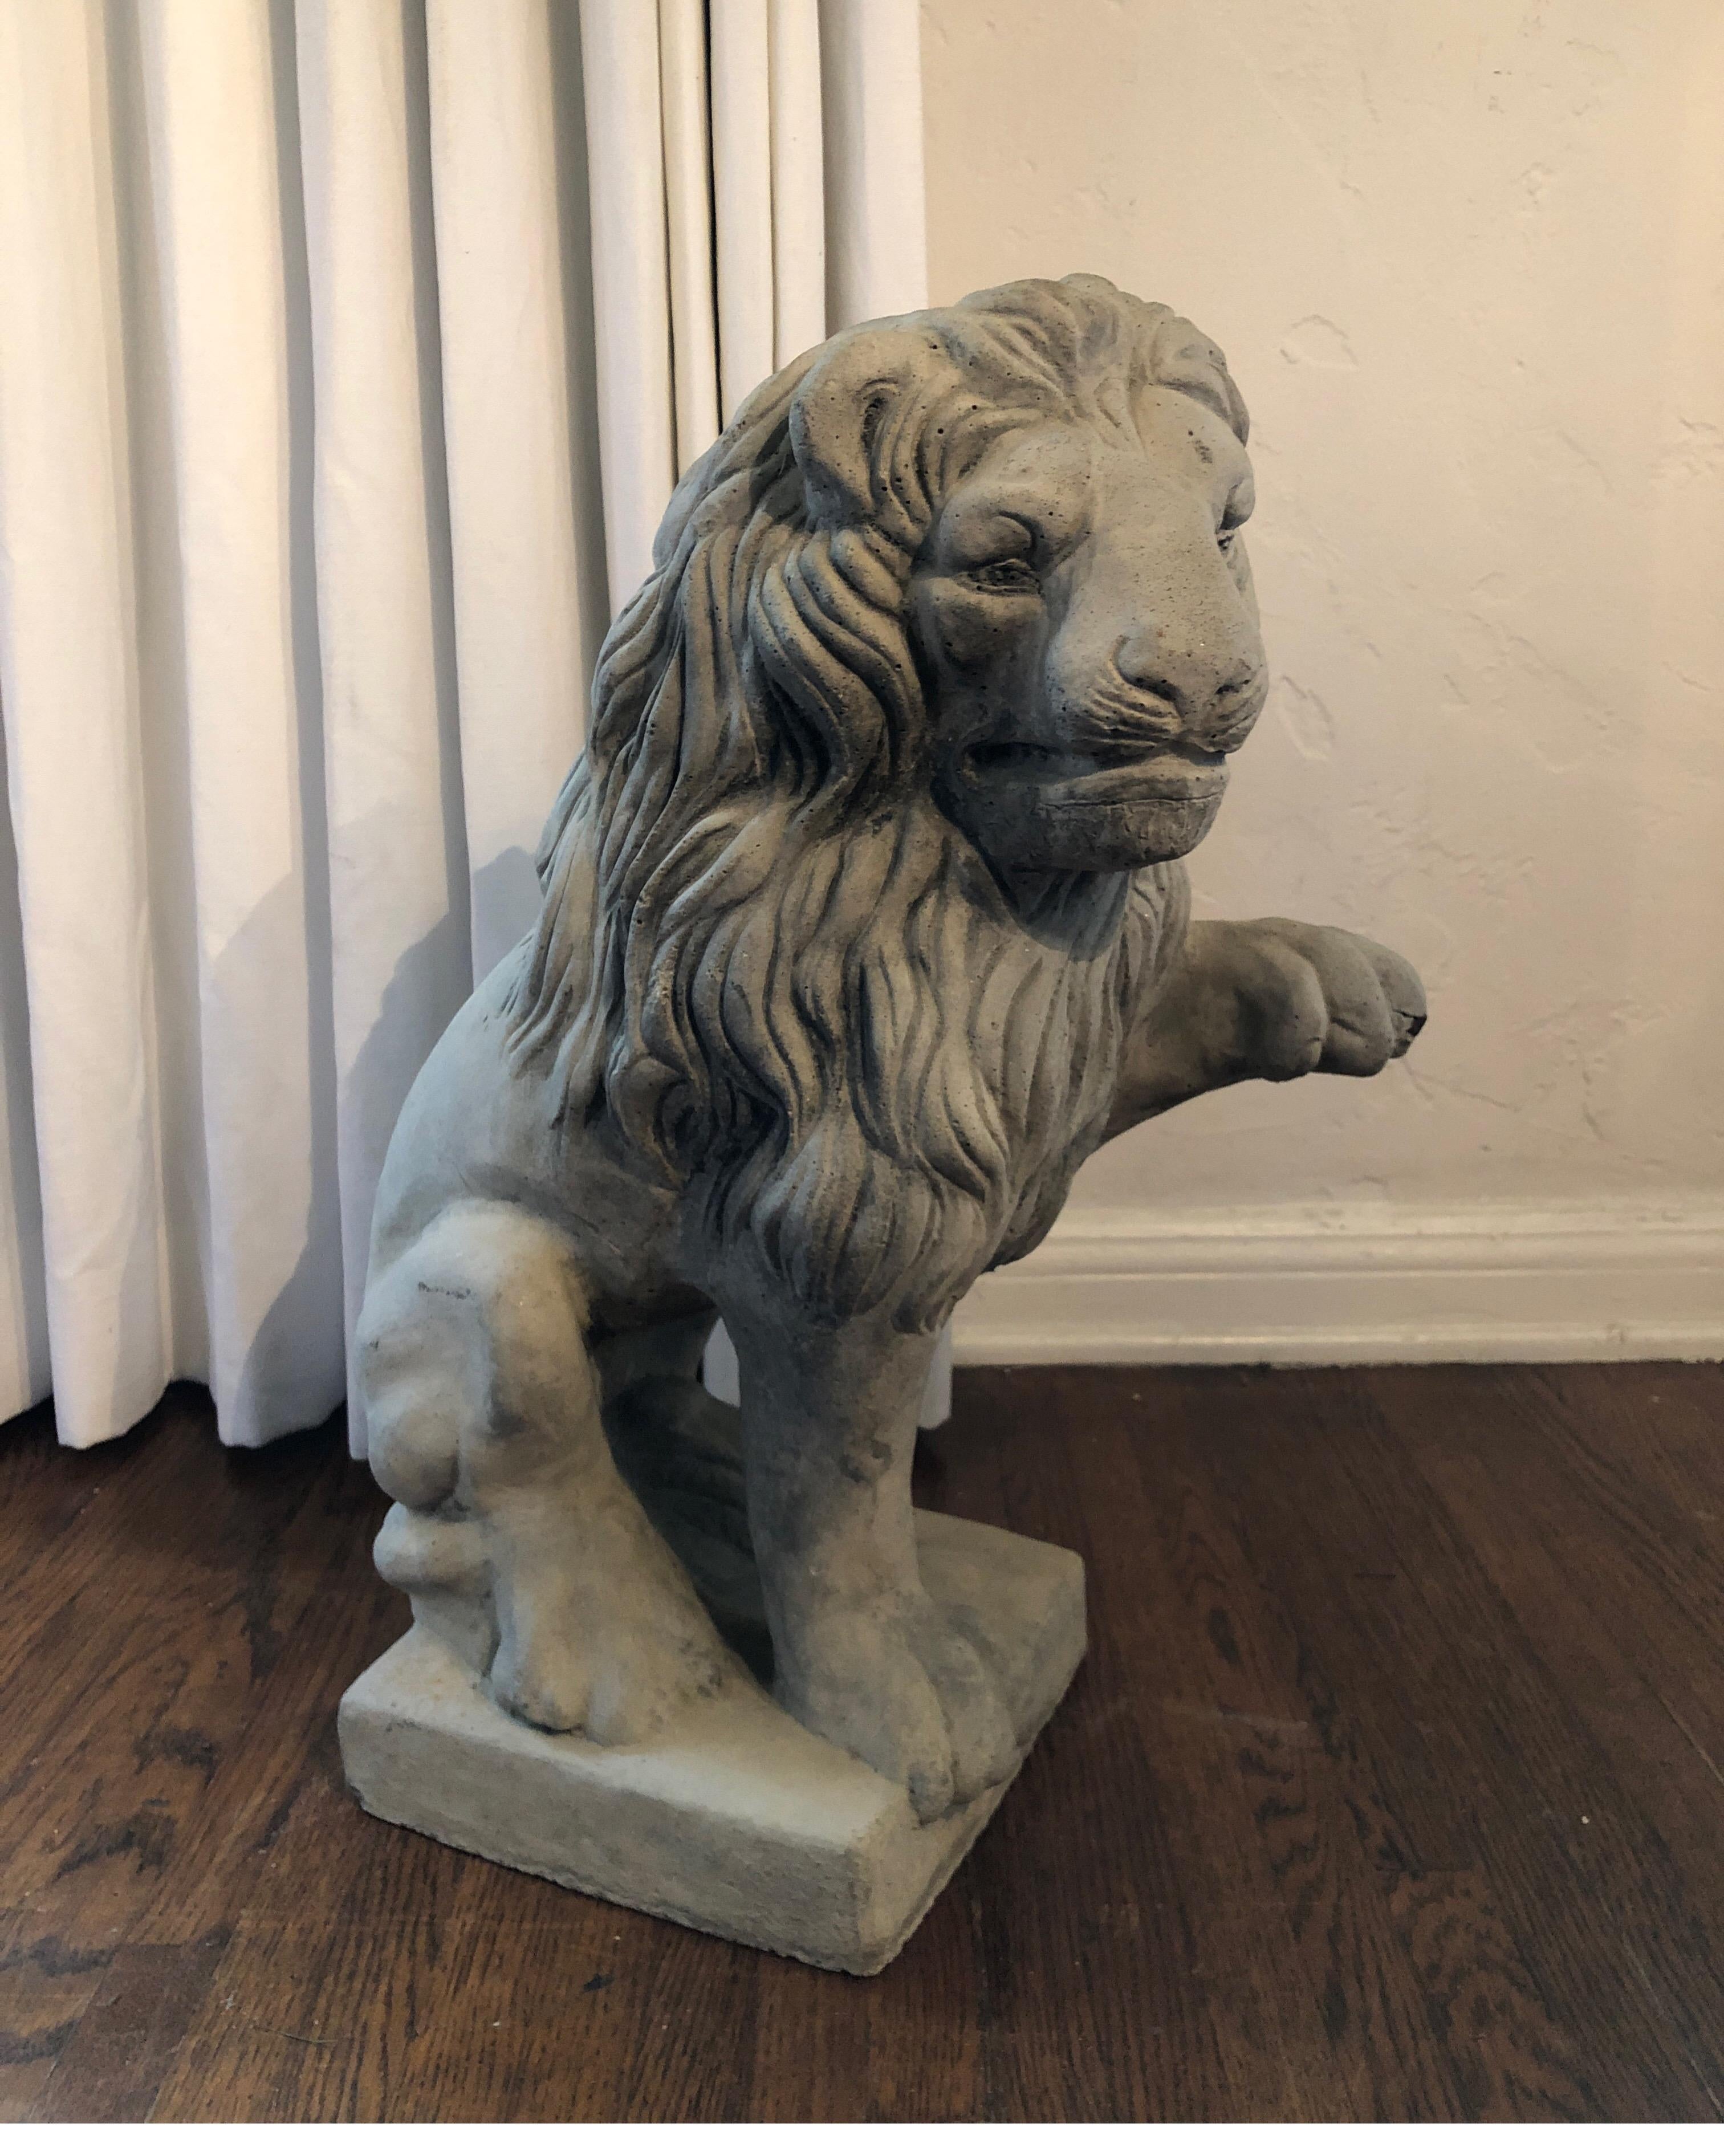 Mid-20th century cast stone garden sculpture lion seated on plinth with one paw raised. Beautiful detail of head and mane. Some natural patina and works great for interior or exterior.
Please note, one crack/chip on one paw. See pics. 

            